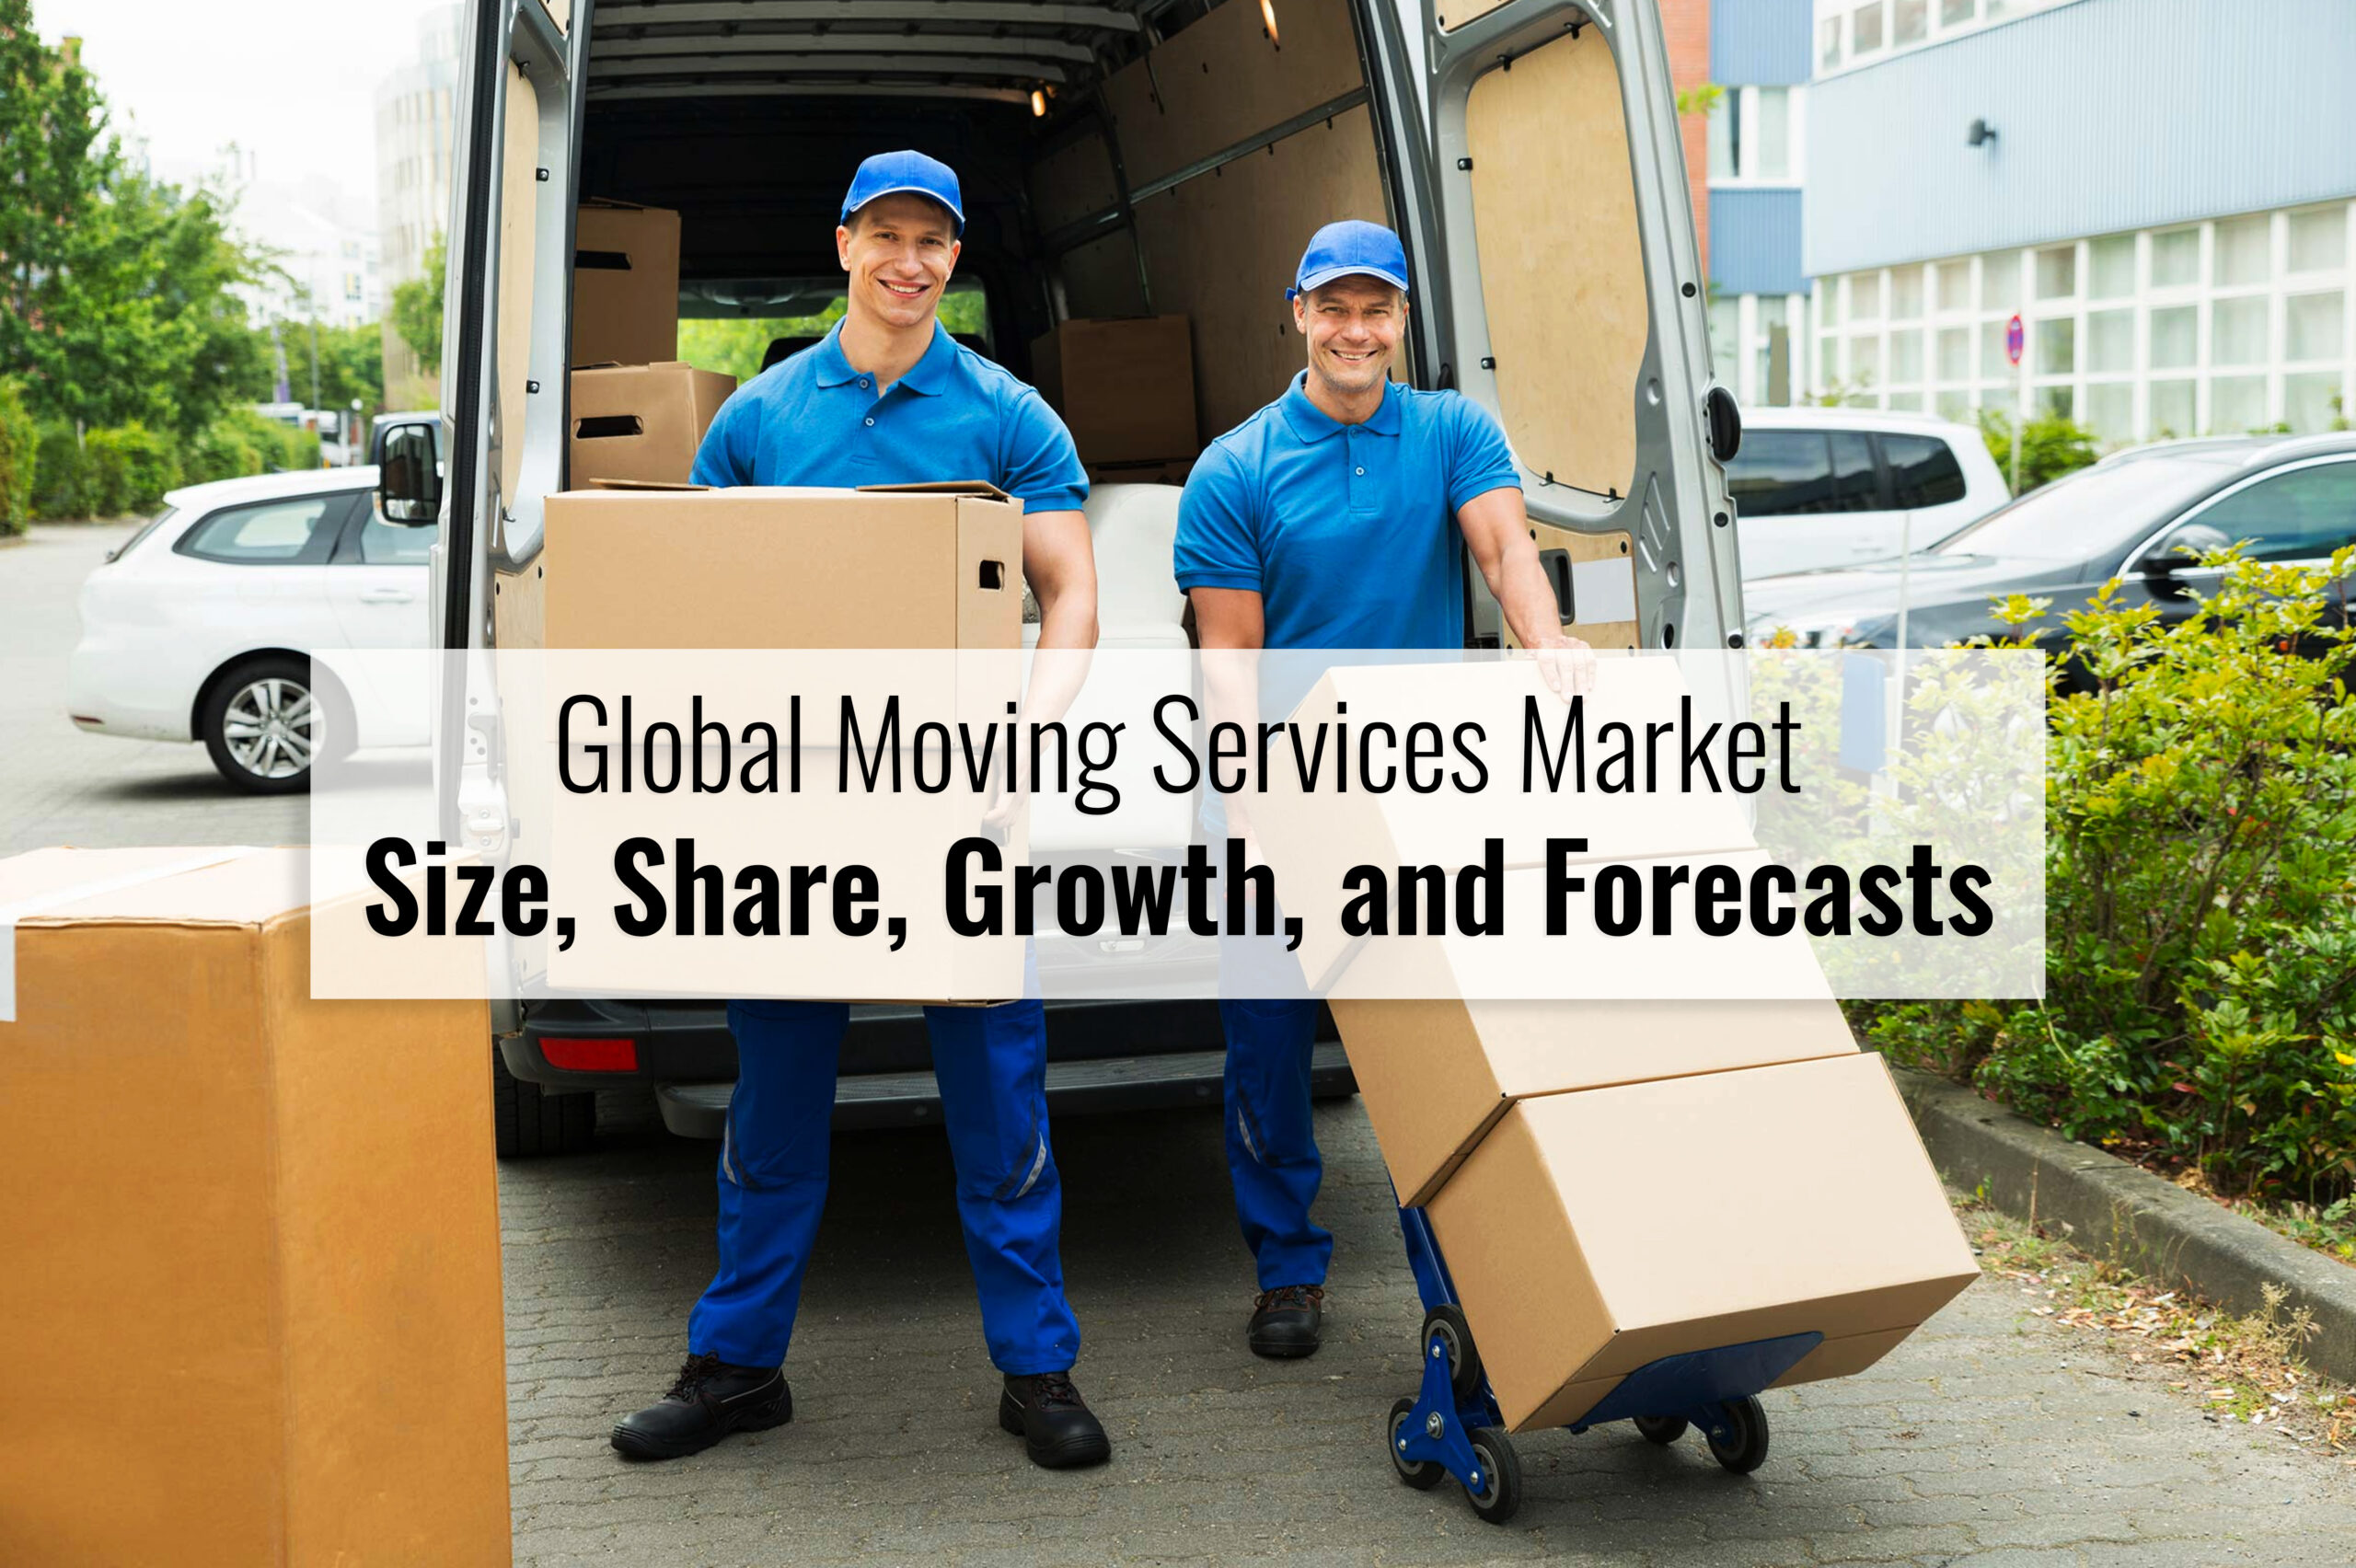 Global Moving Services Market Size, Share, Growth, and Forecasts